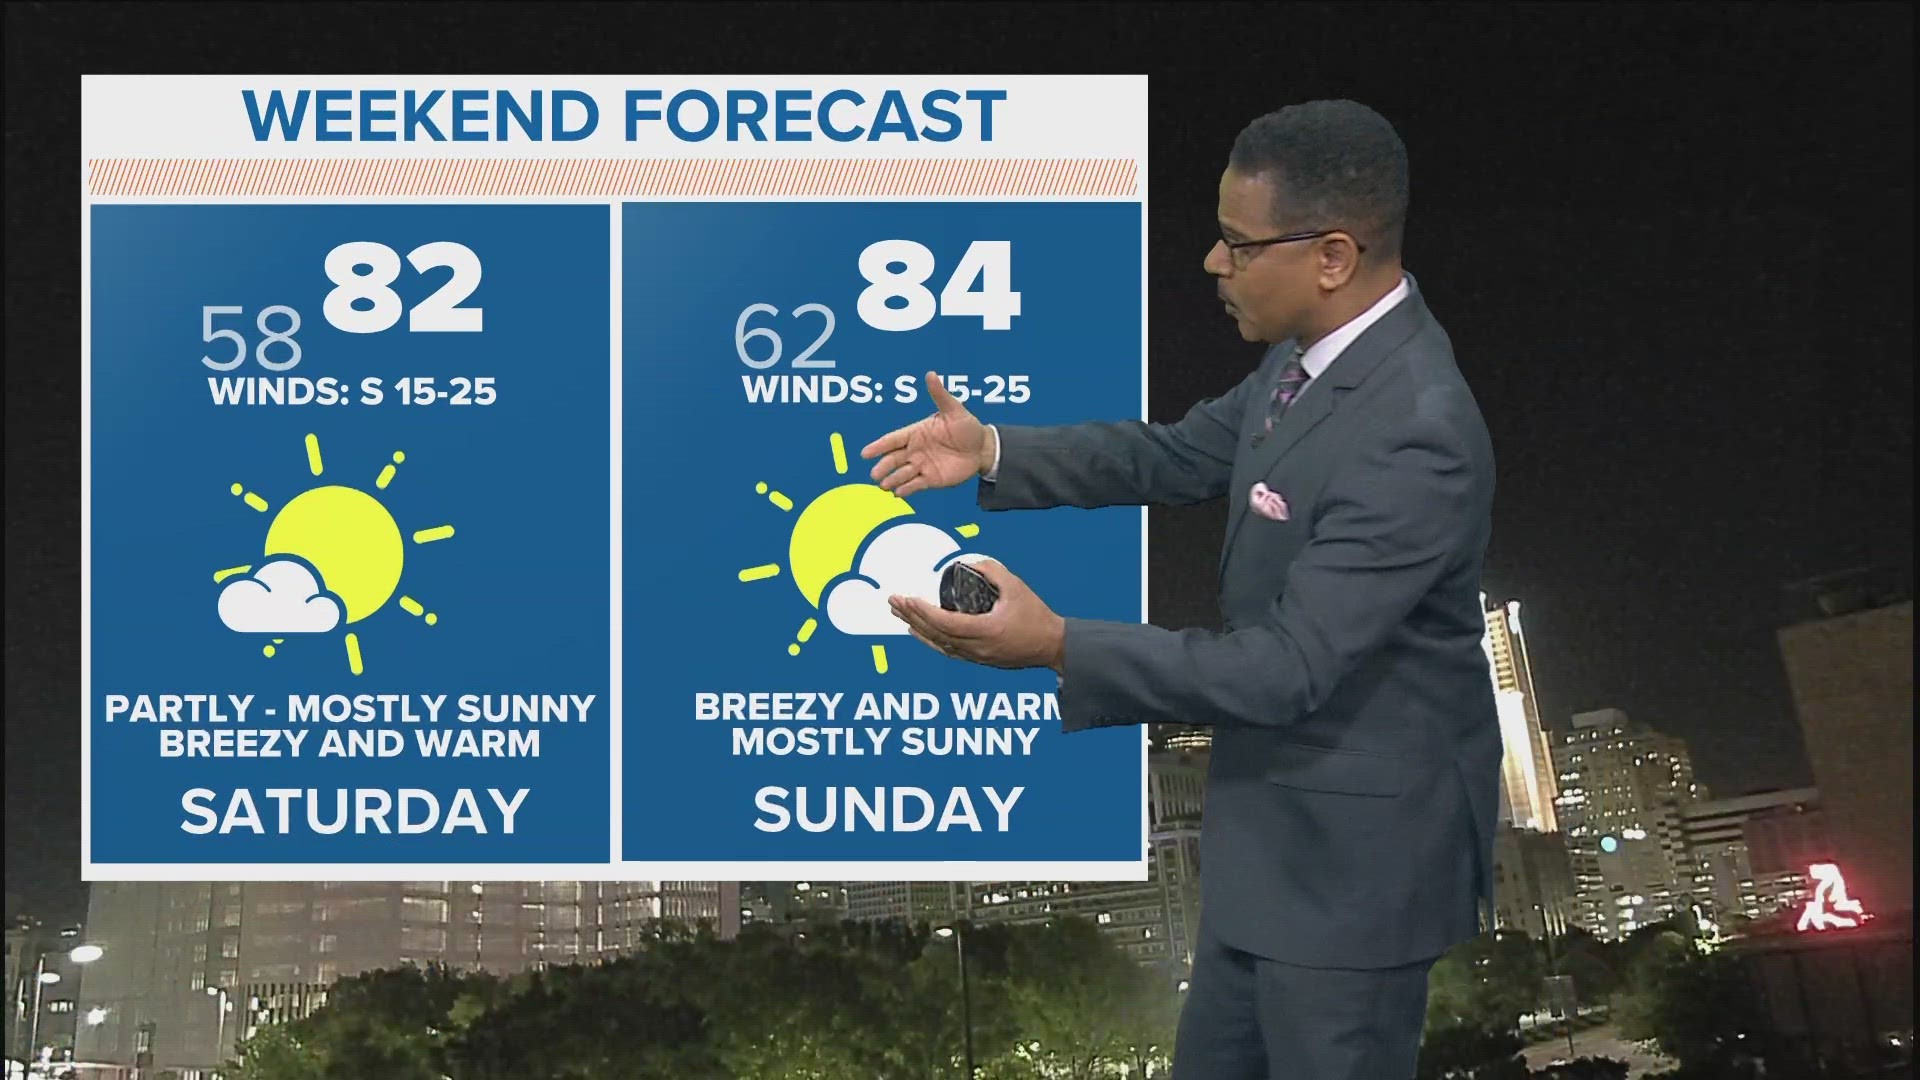 Greg Fields has a look at the North Texas weather forecast for this weekend.